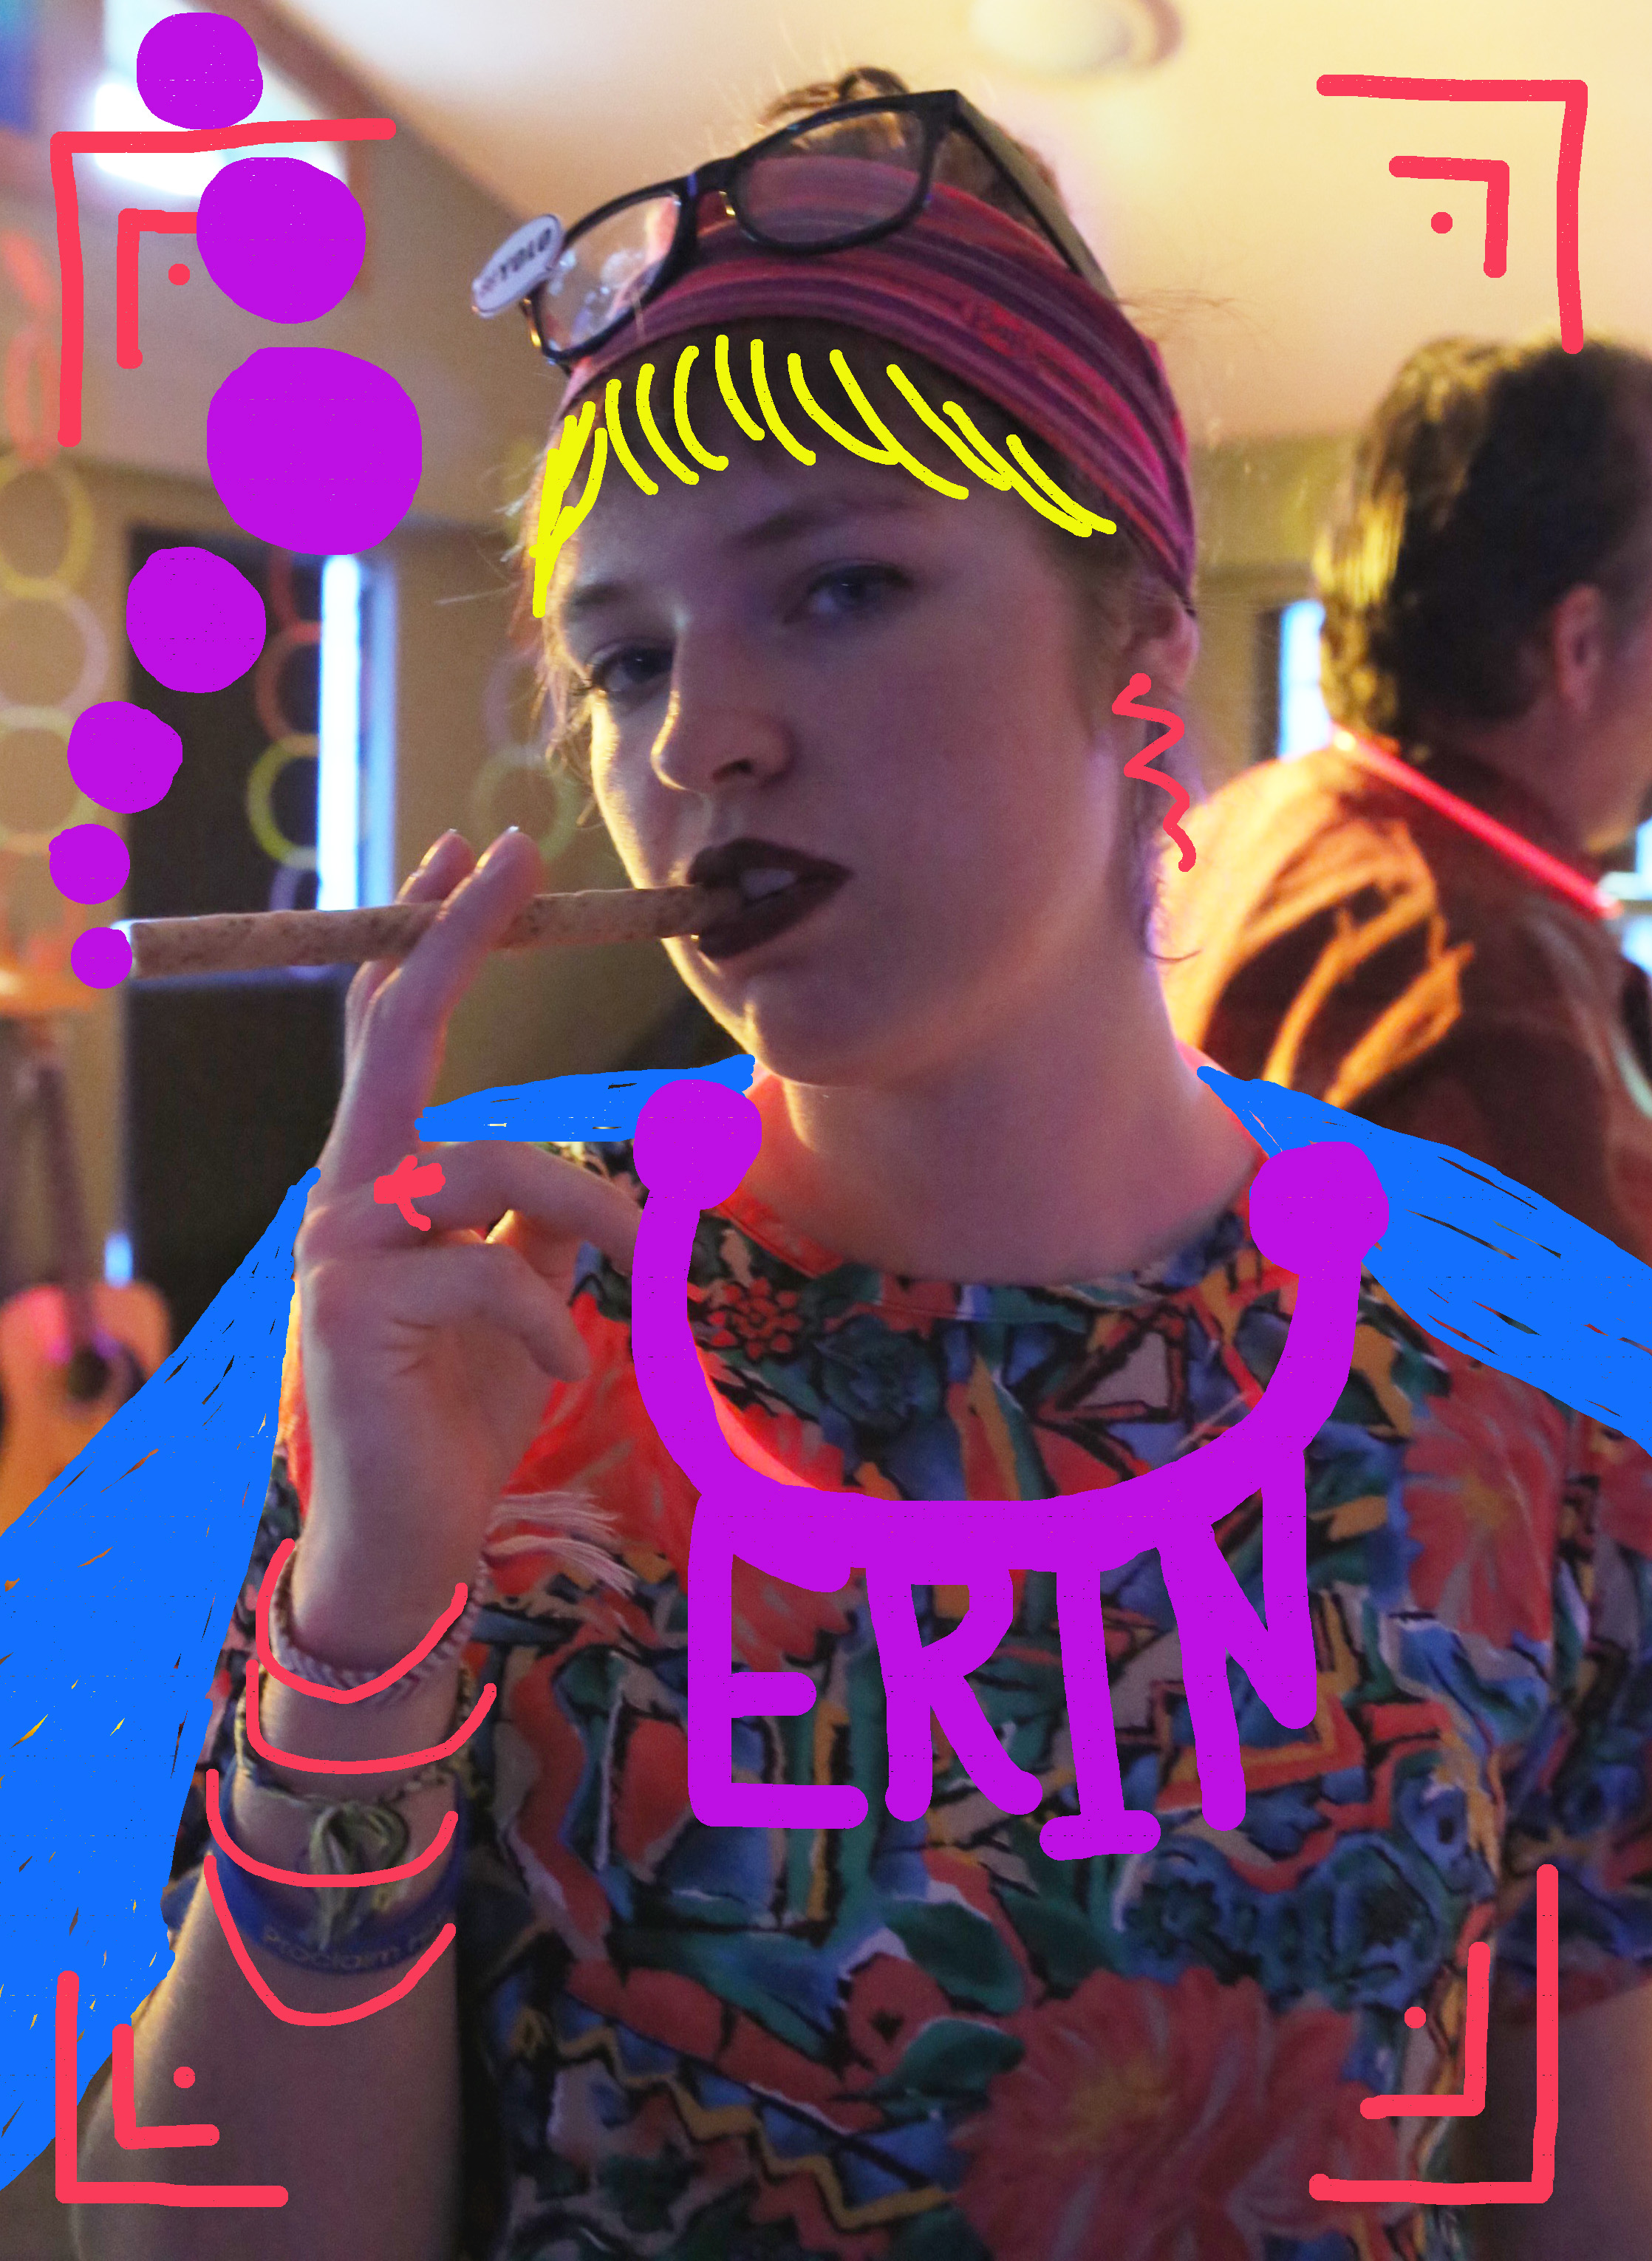 Erin is Awesome.jpg